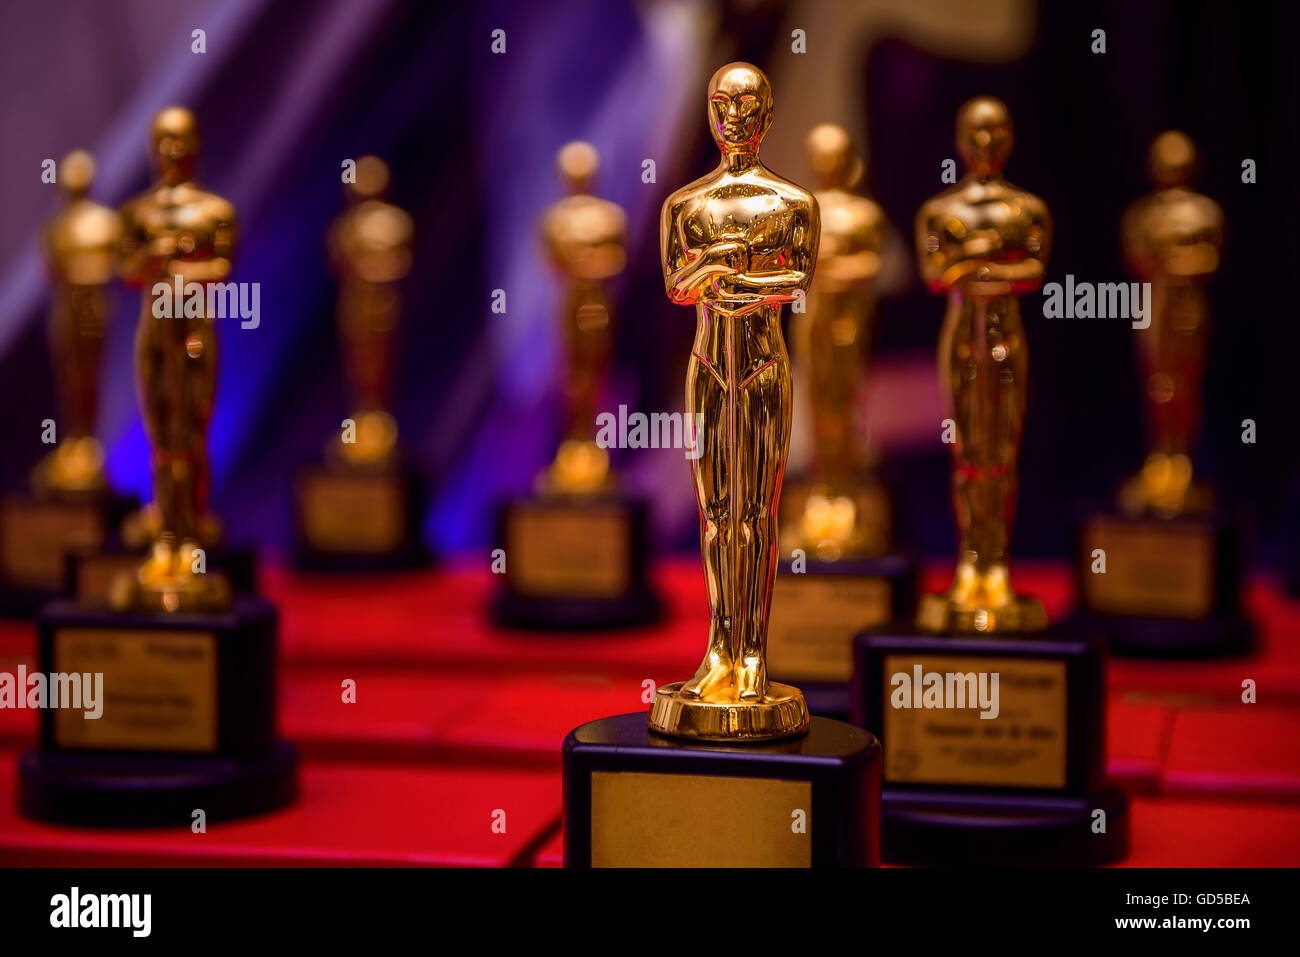 A Group of  Shiny Golden Prizes Stock Photo